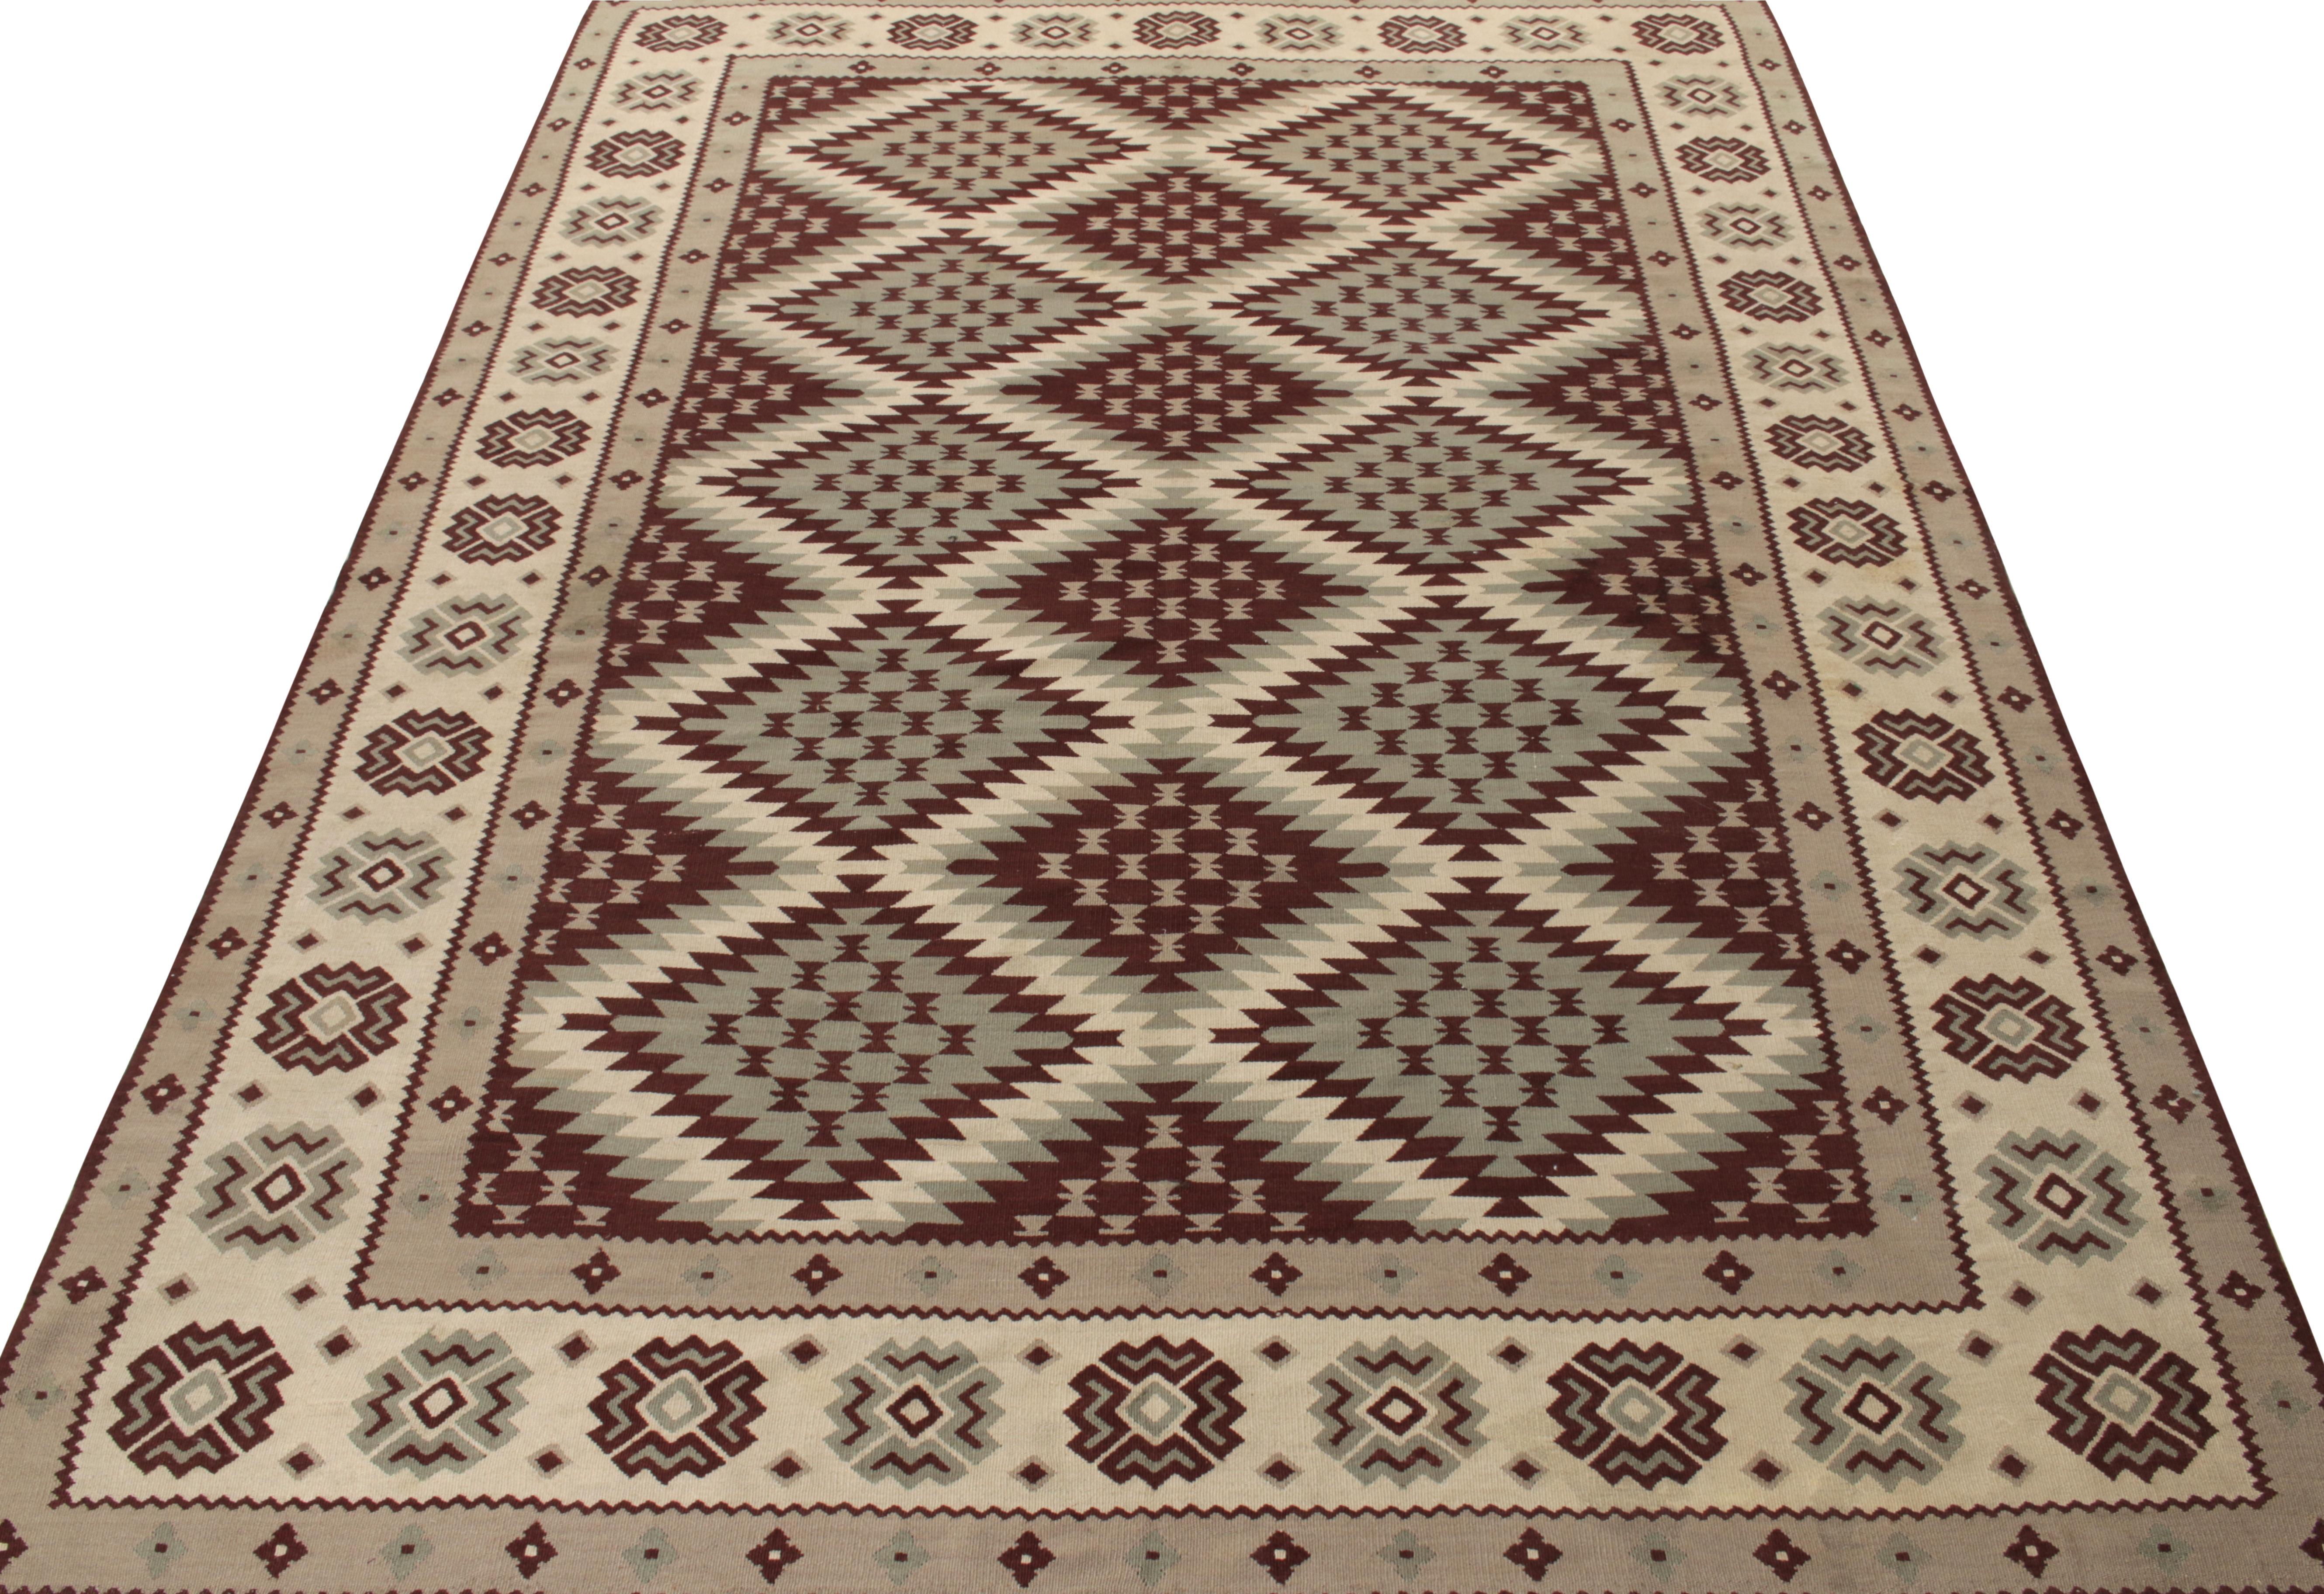 Originating from Turkey circa 1950-1960, a sharp vintage kilim rug featuring a neat geometric pattern with tribal motifs in lava grey, creamy off white and mature brown accents. Bearing Balkan influence, a 6x9 collectible thriving in excellent